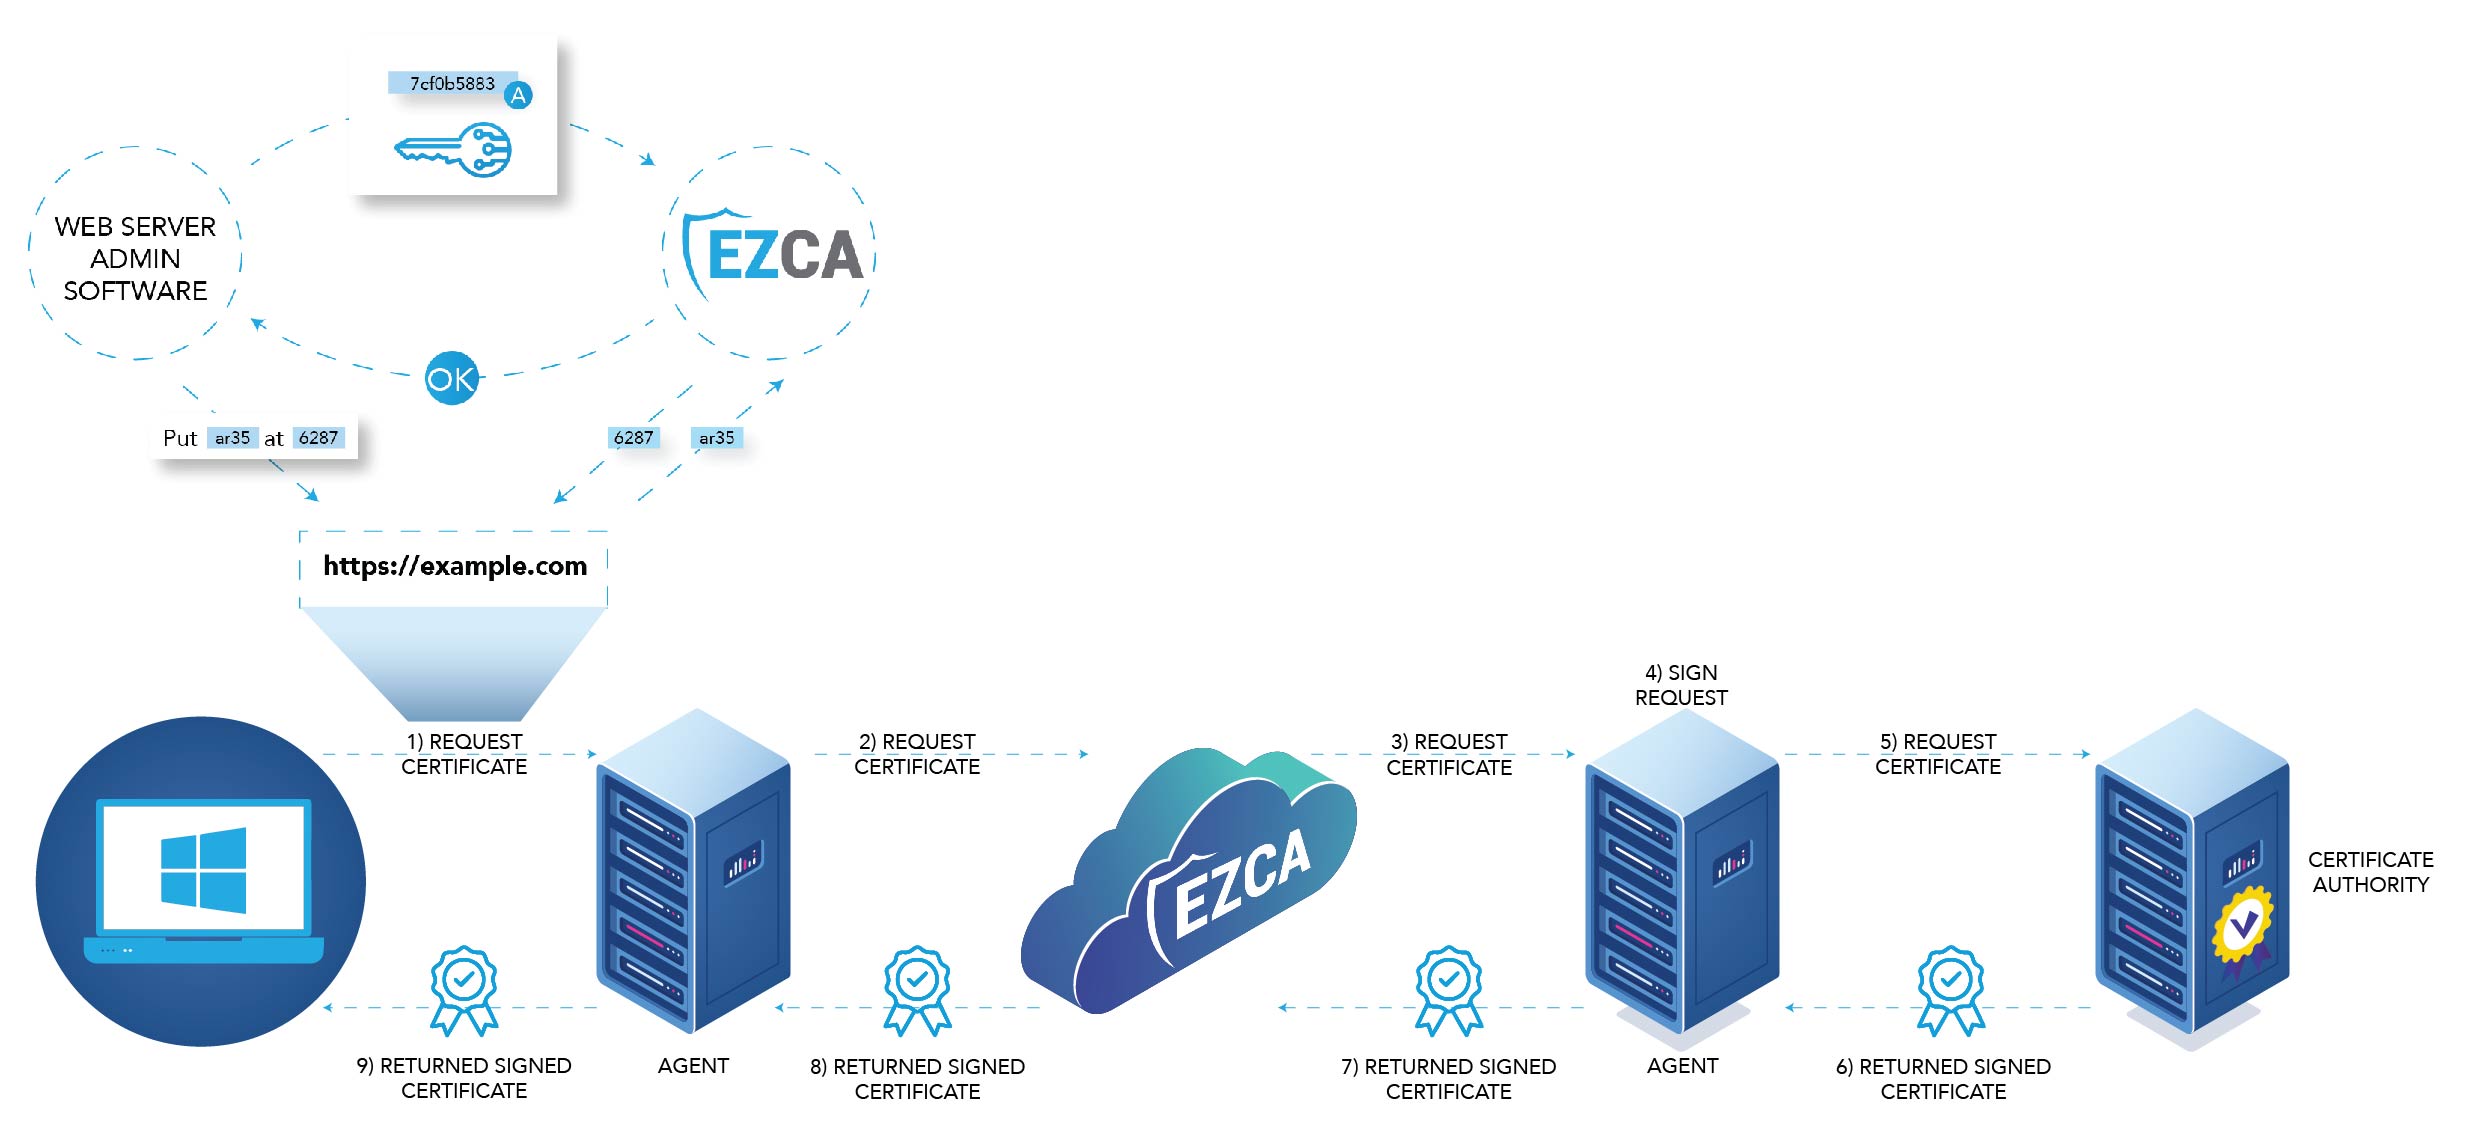 How EZCA enables ACME for ADCS